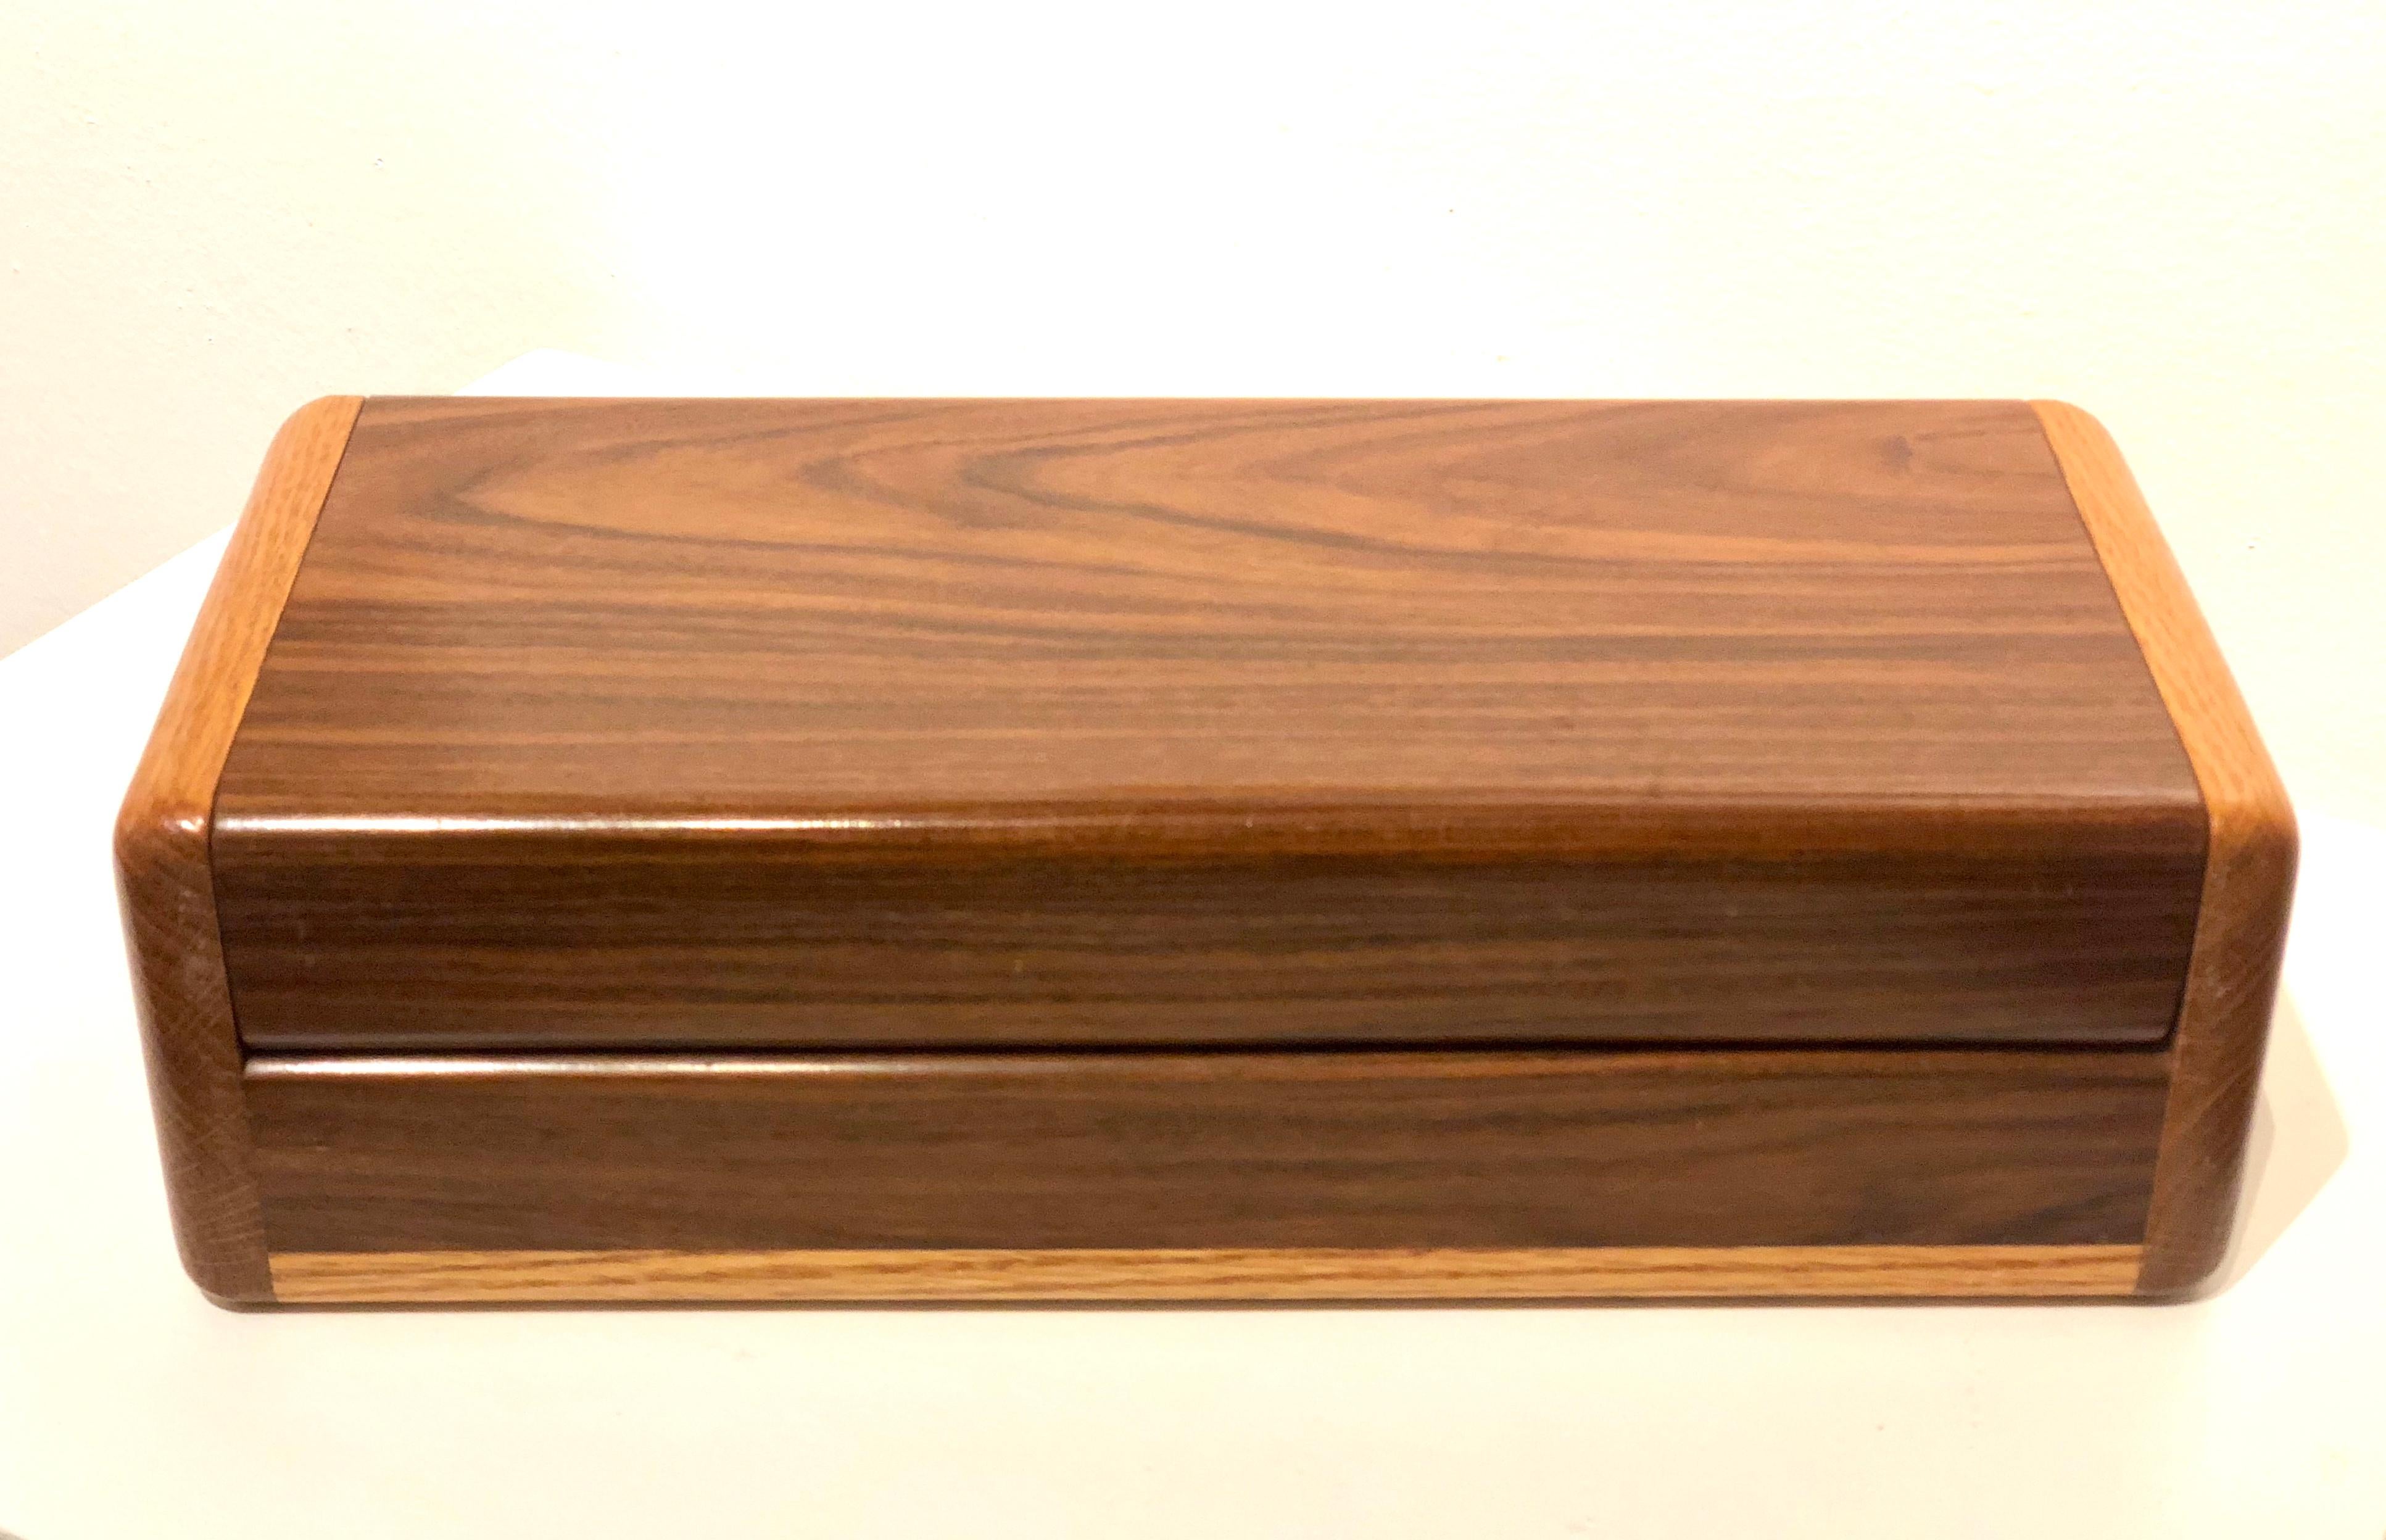 A unique walnut jewelry box piece handcrafted, well done piece solid walnut and oak nice removable tray.